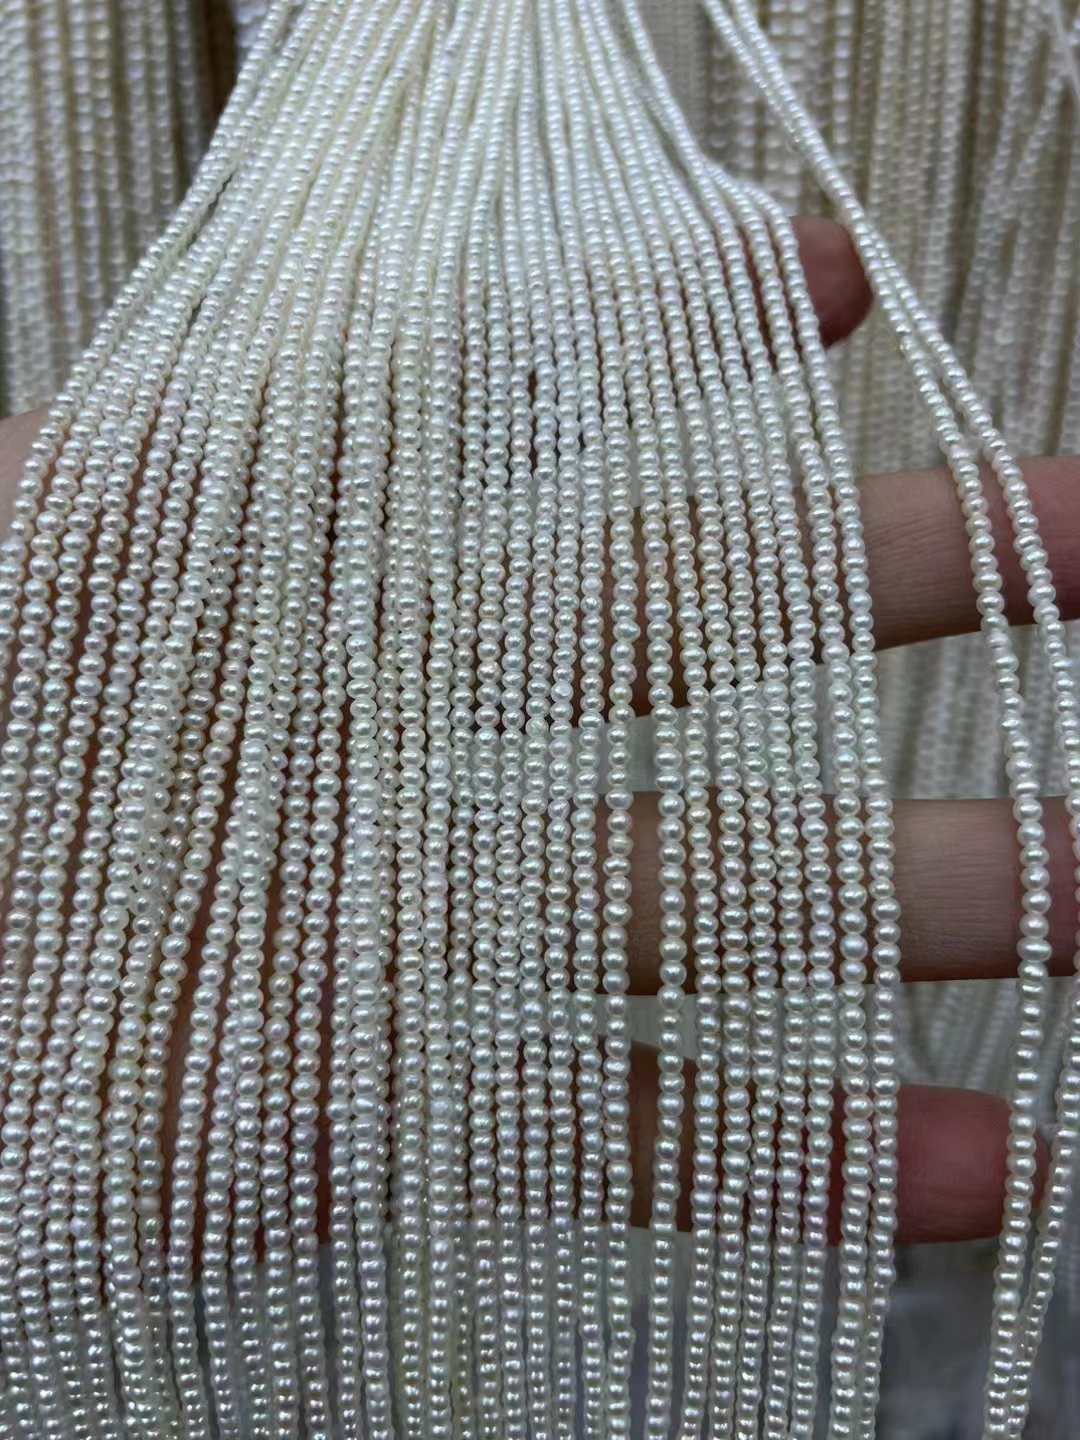 Natural freshwater pearl 2mm high quality pretty luster smooth surface white round strong bright pearl strands bulk sale